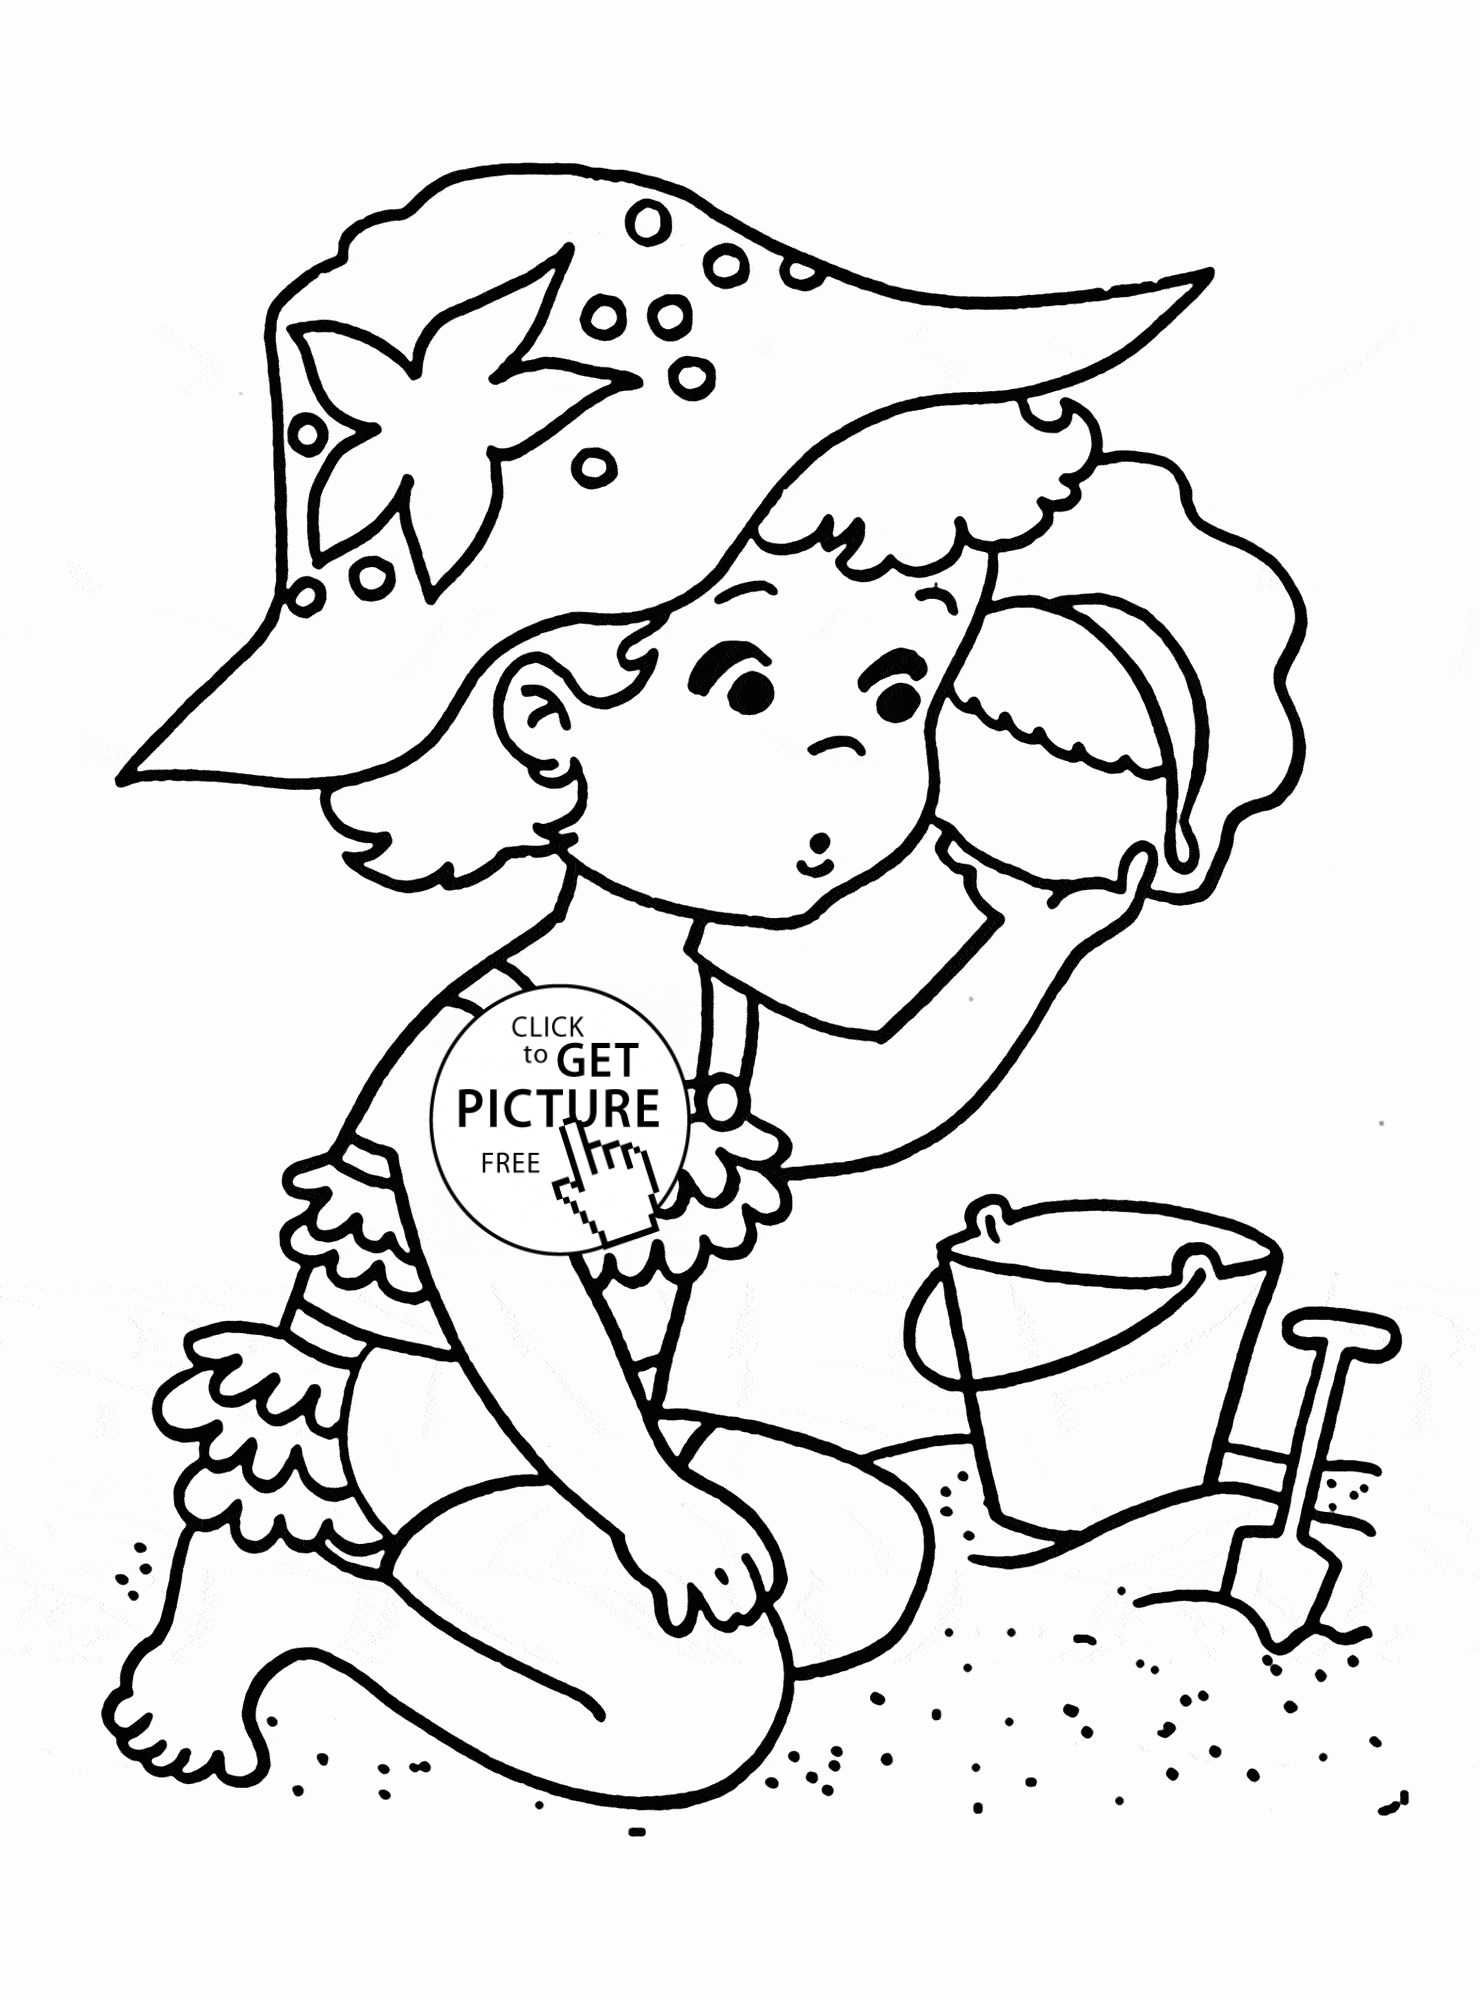 Little Summer Girl coloring page for kids, seasons coloring pages ...